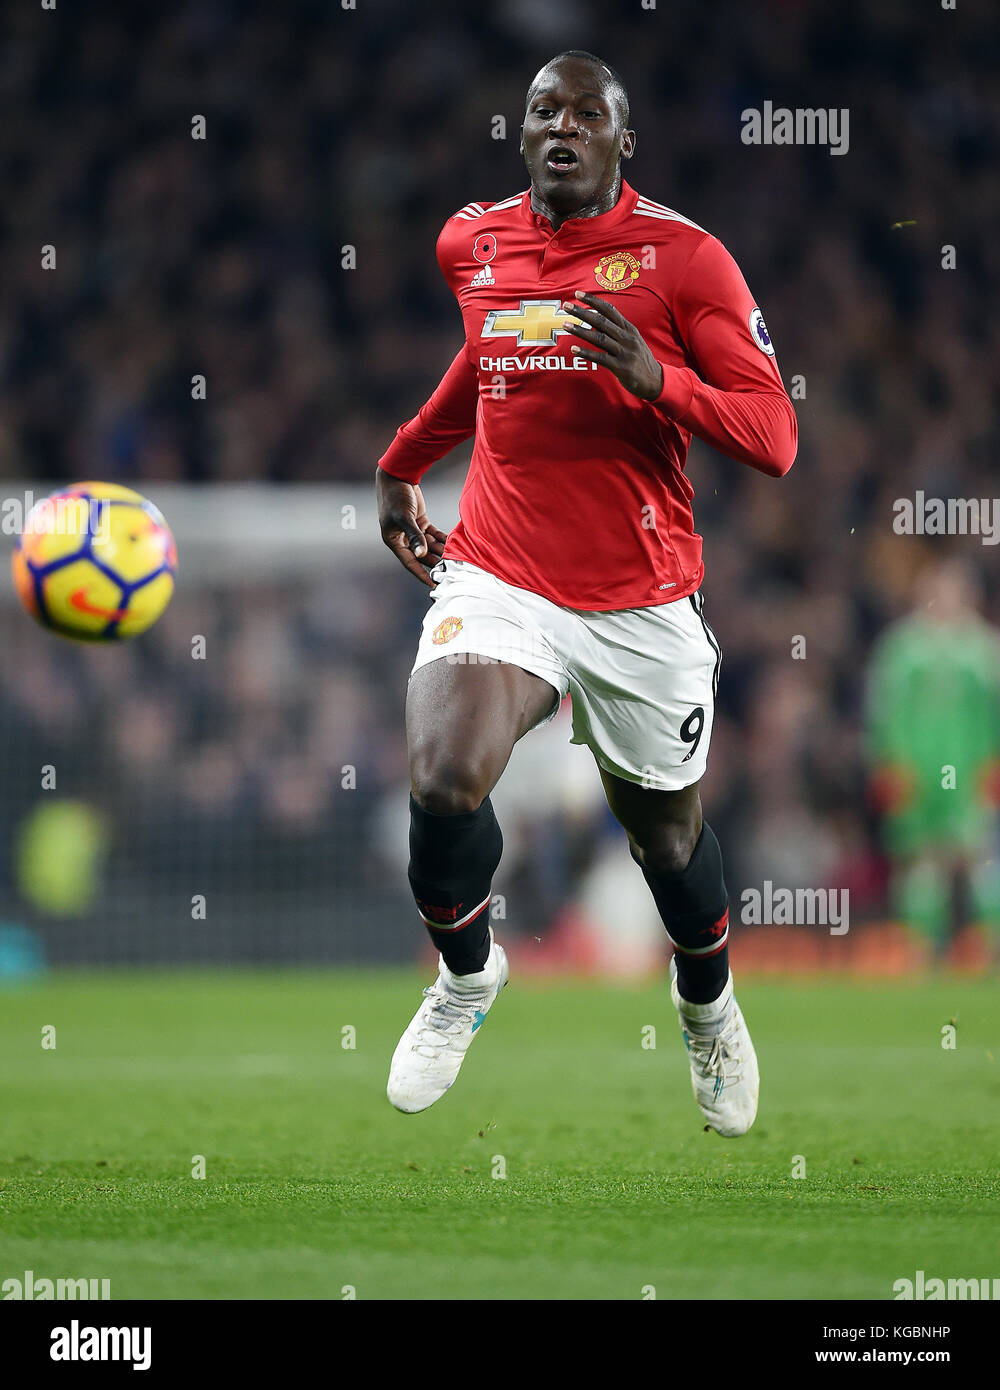 Romelu Lukaku of Manchester United CHELSEA V MANCHESTER UNITED CHELSEA V MANCHESTER UNITED, PREMIER LEAGUE 05 November 2017 GBB5036 PREMIER LEAGUE 05/11/2017 STRICTLY EDITORIAL USE ONLY. If The Player/Players Depicted In This Image Is/Are Playing For An English Club Or The England National Team. Then This Image May Only Be Used For Editorial Purposes. No Commercial Use. The Following Usages Are Also Restricted EVEN IF IN AN EDITORIAL CONTEXT: Use in conjuction with, or part of, any unauthorized audio, video, data, fixture lists, club/league logos, Betting, Games or any 'live' s Stock Photo